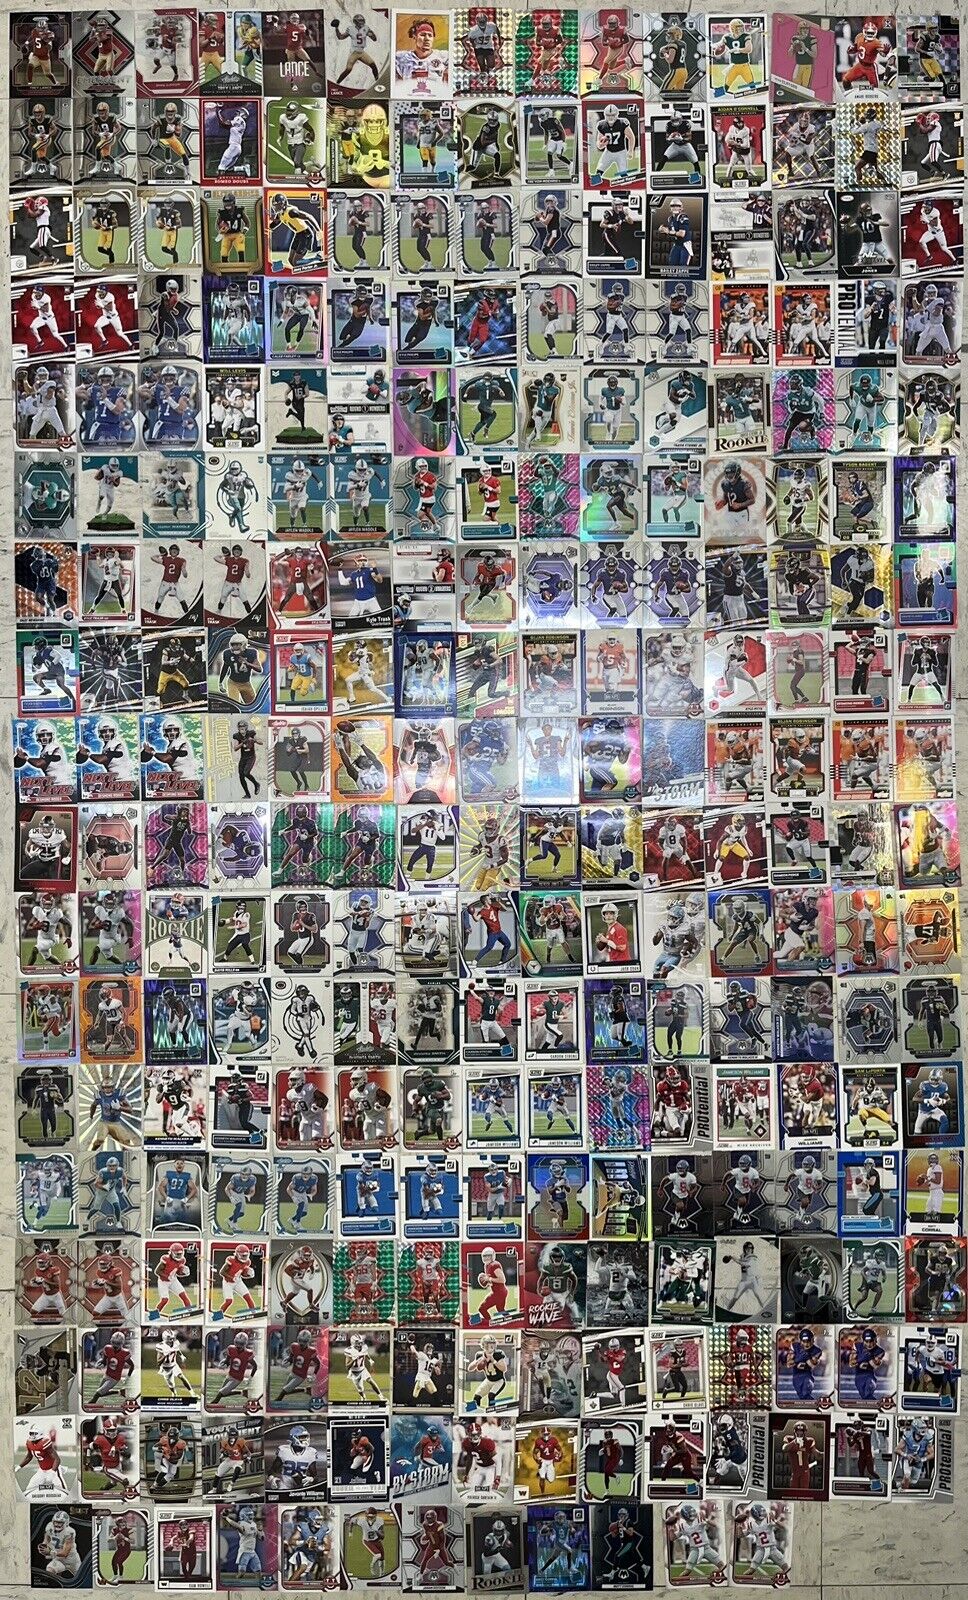 Huge 500 ALL Rookie Card NFL Lot Prizms Mosaic SP Base Optic Parallels QB RC's